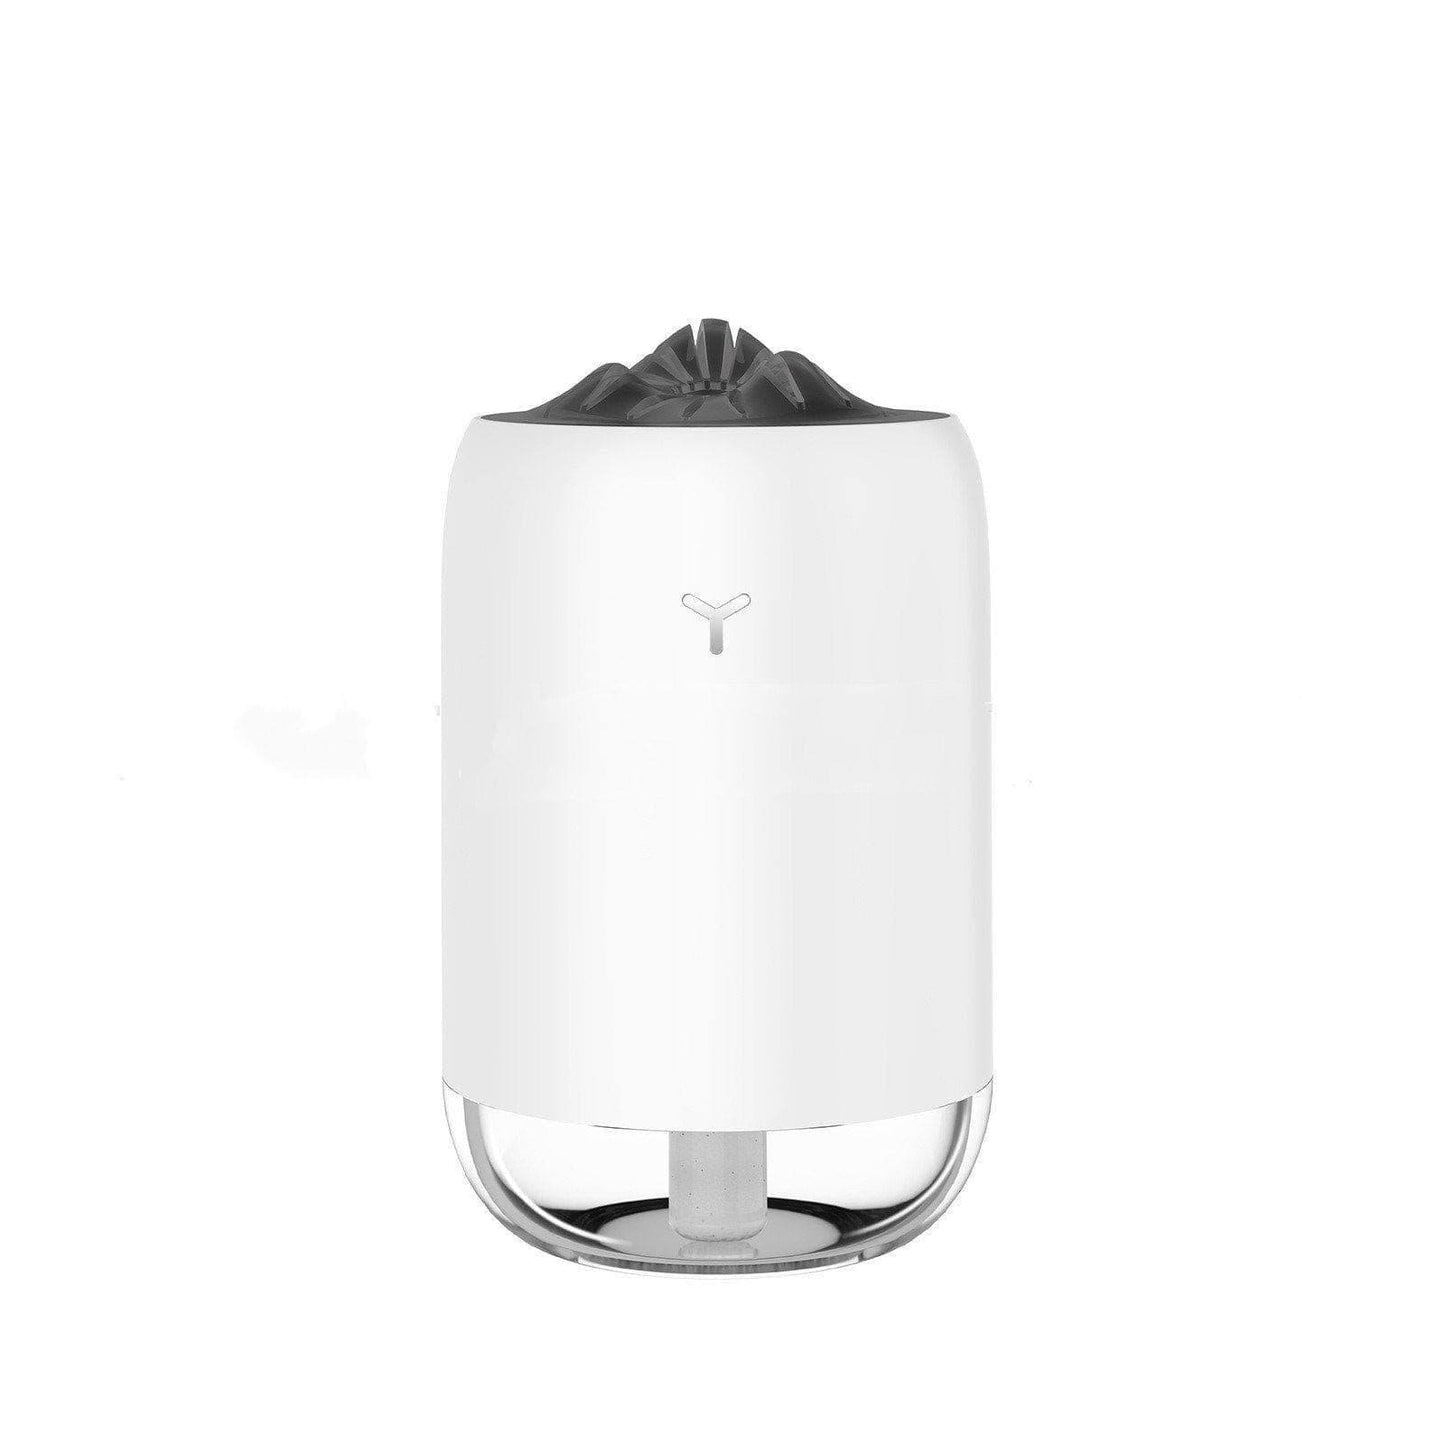 ezy2find Mini USB Humidifier Atomizer White Mini USB Humidifier Atomizer Home Humidifier Refill Onboard Humidifier